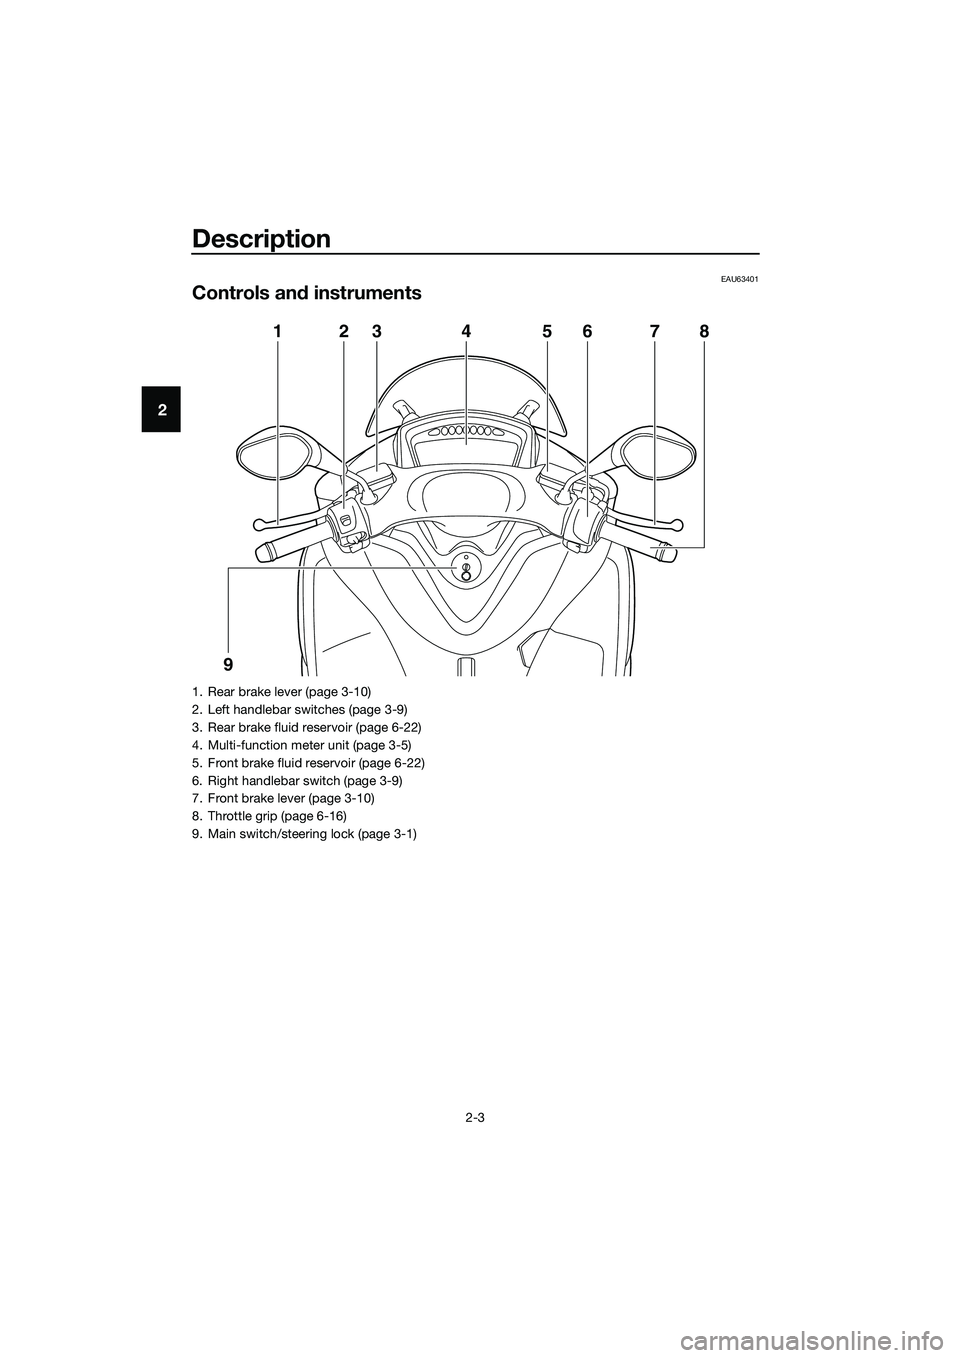 YAMAHA TRICITY 2017 User Guide Description
2-3
2
EAU63401
Controls and instruments
1
923 7 86 5 4
1. Rear brake lever (page 3-10)
2. Left handlebar switches (page 3-9)
3. Rear brake fluid reservoir (page 6-22)
4. Multi-function met